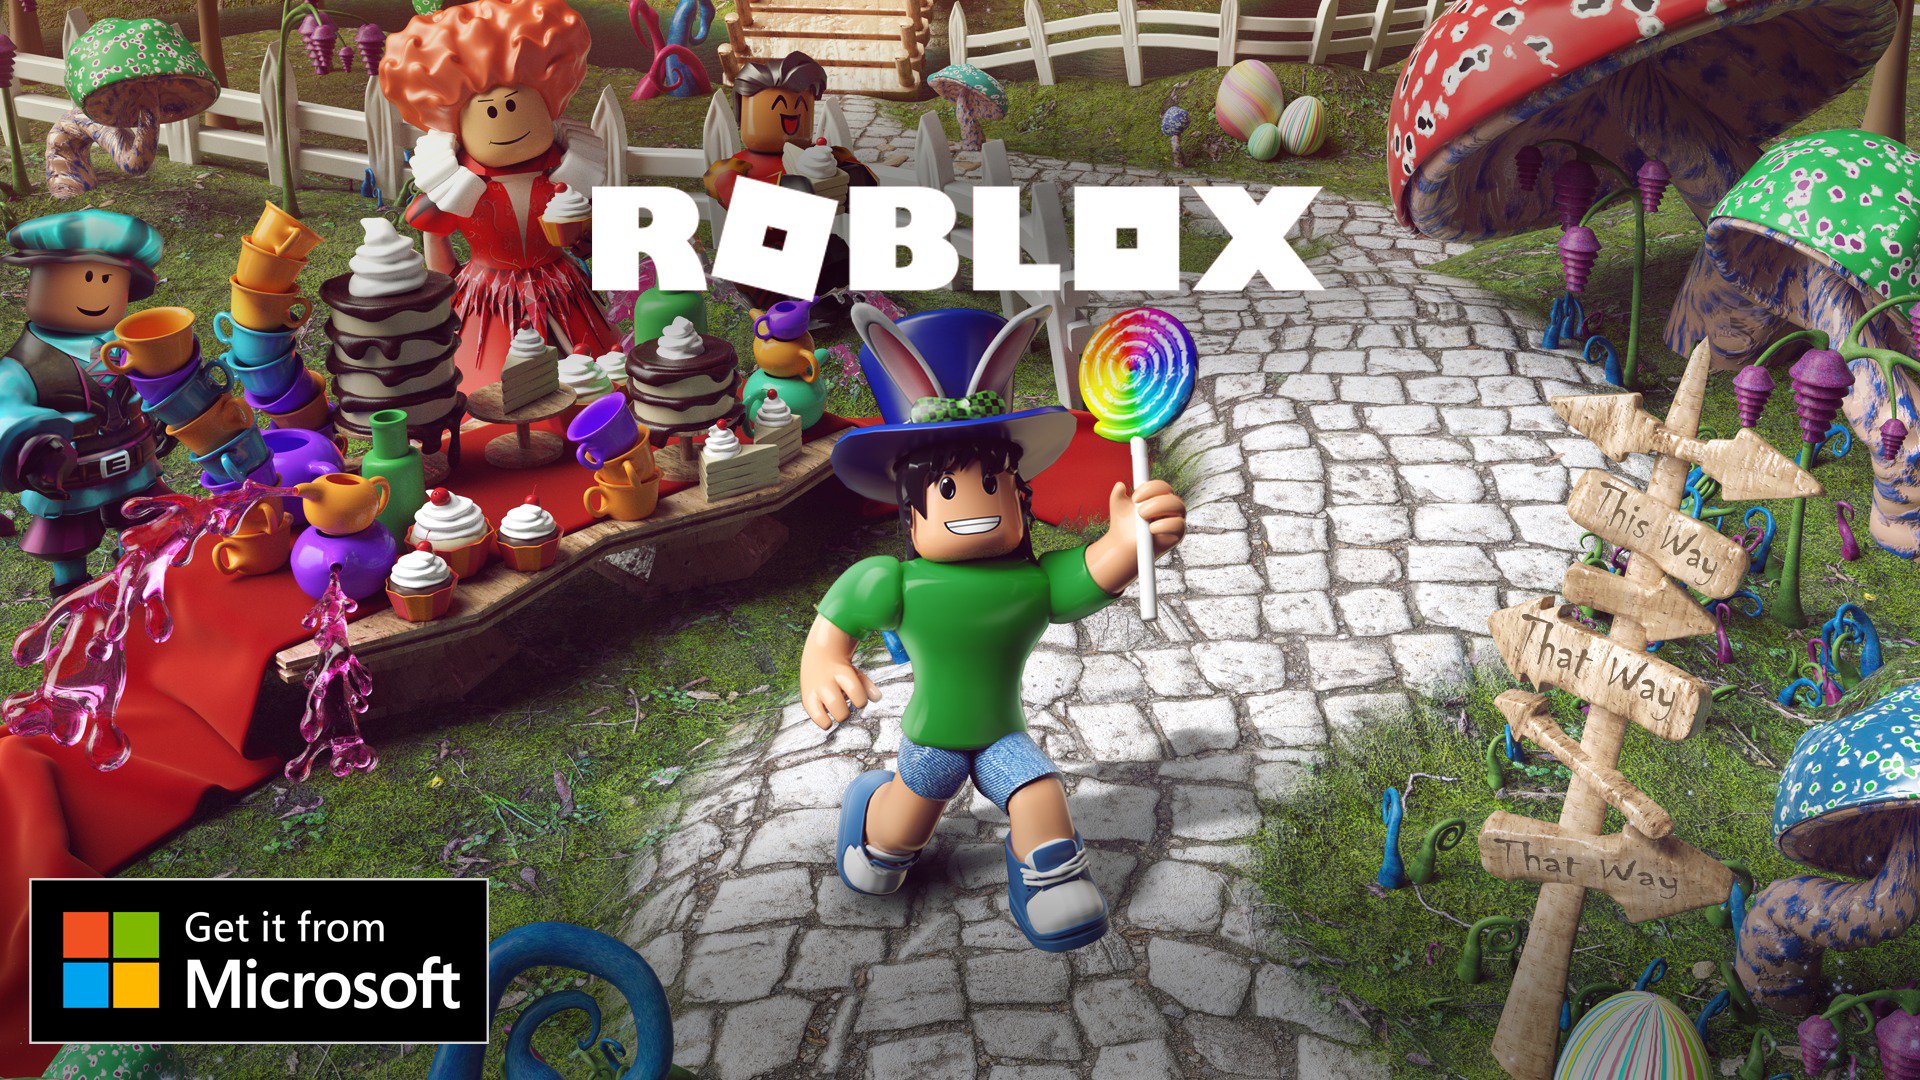 Roblox On Twitter Don T Keep The Eggs Waiting Get The Roblox App From The Microsoft Store Up To 50 Off Egghunt2018 Items Until April 11th Https T Co Amu6m2syqt Https T Co J238zimlzs - get roblox microsoft